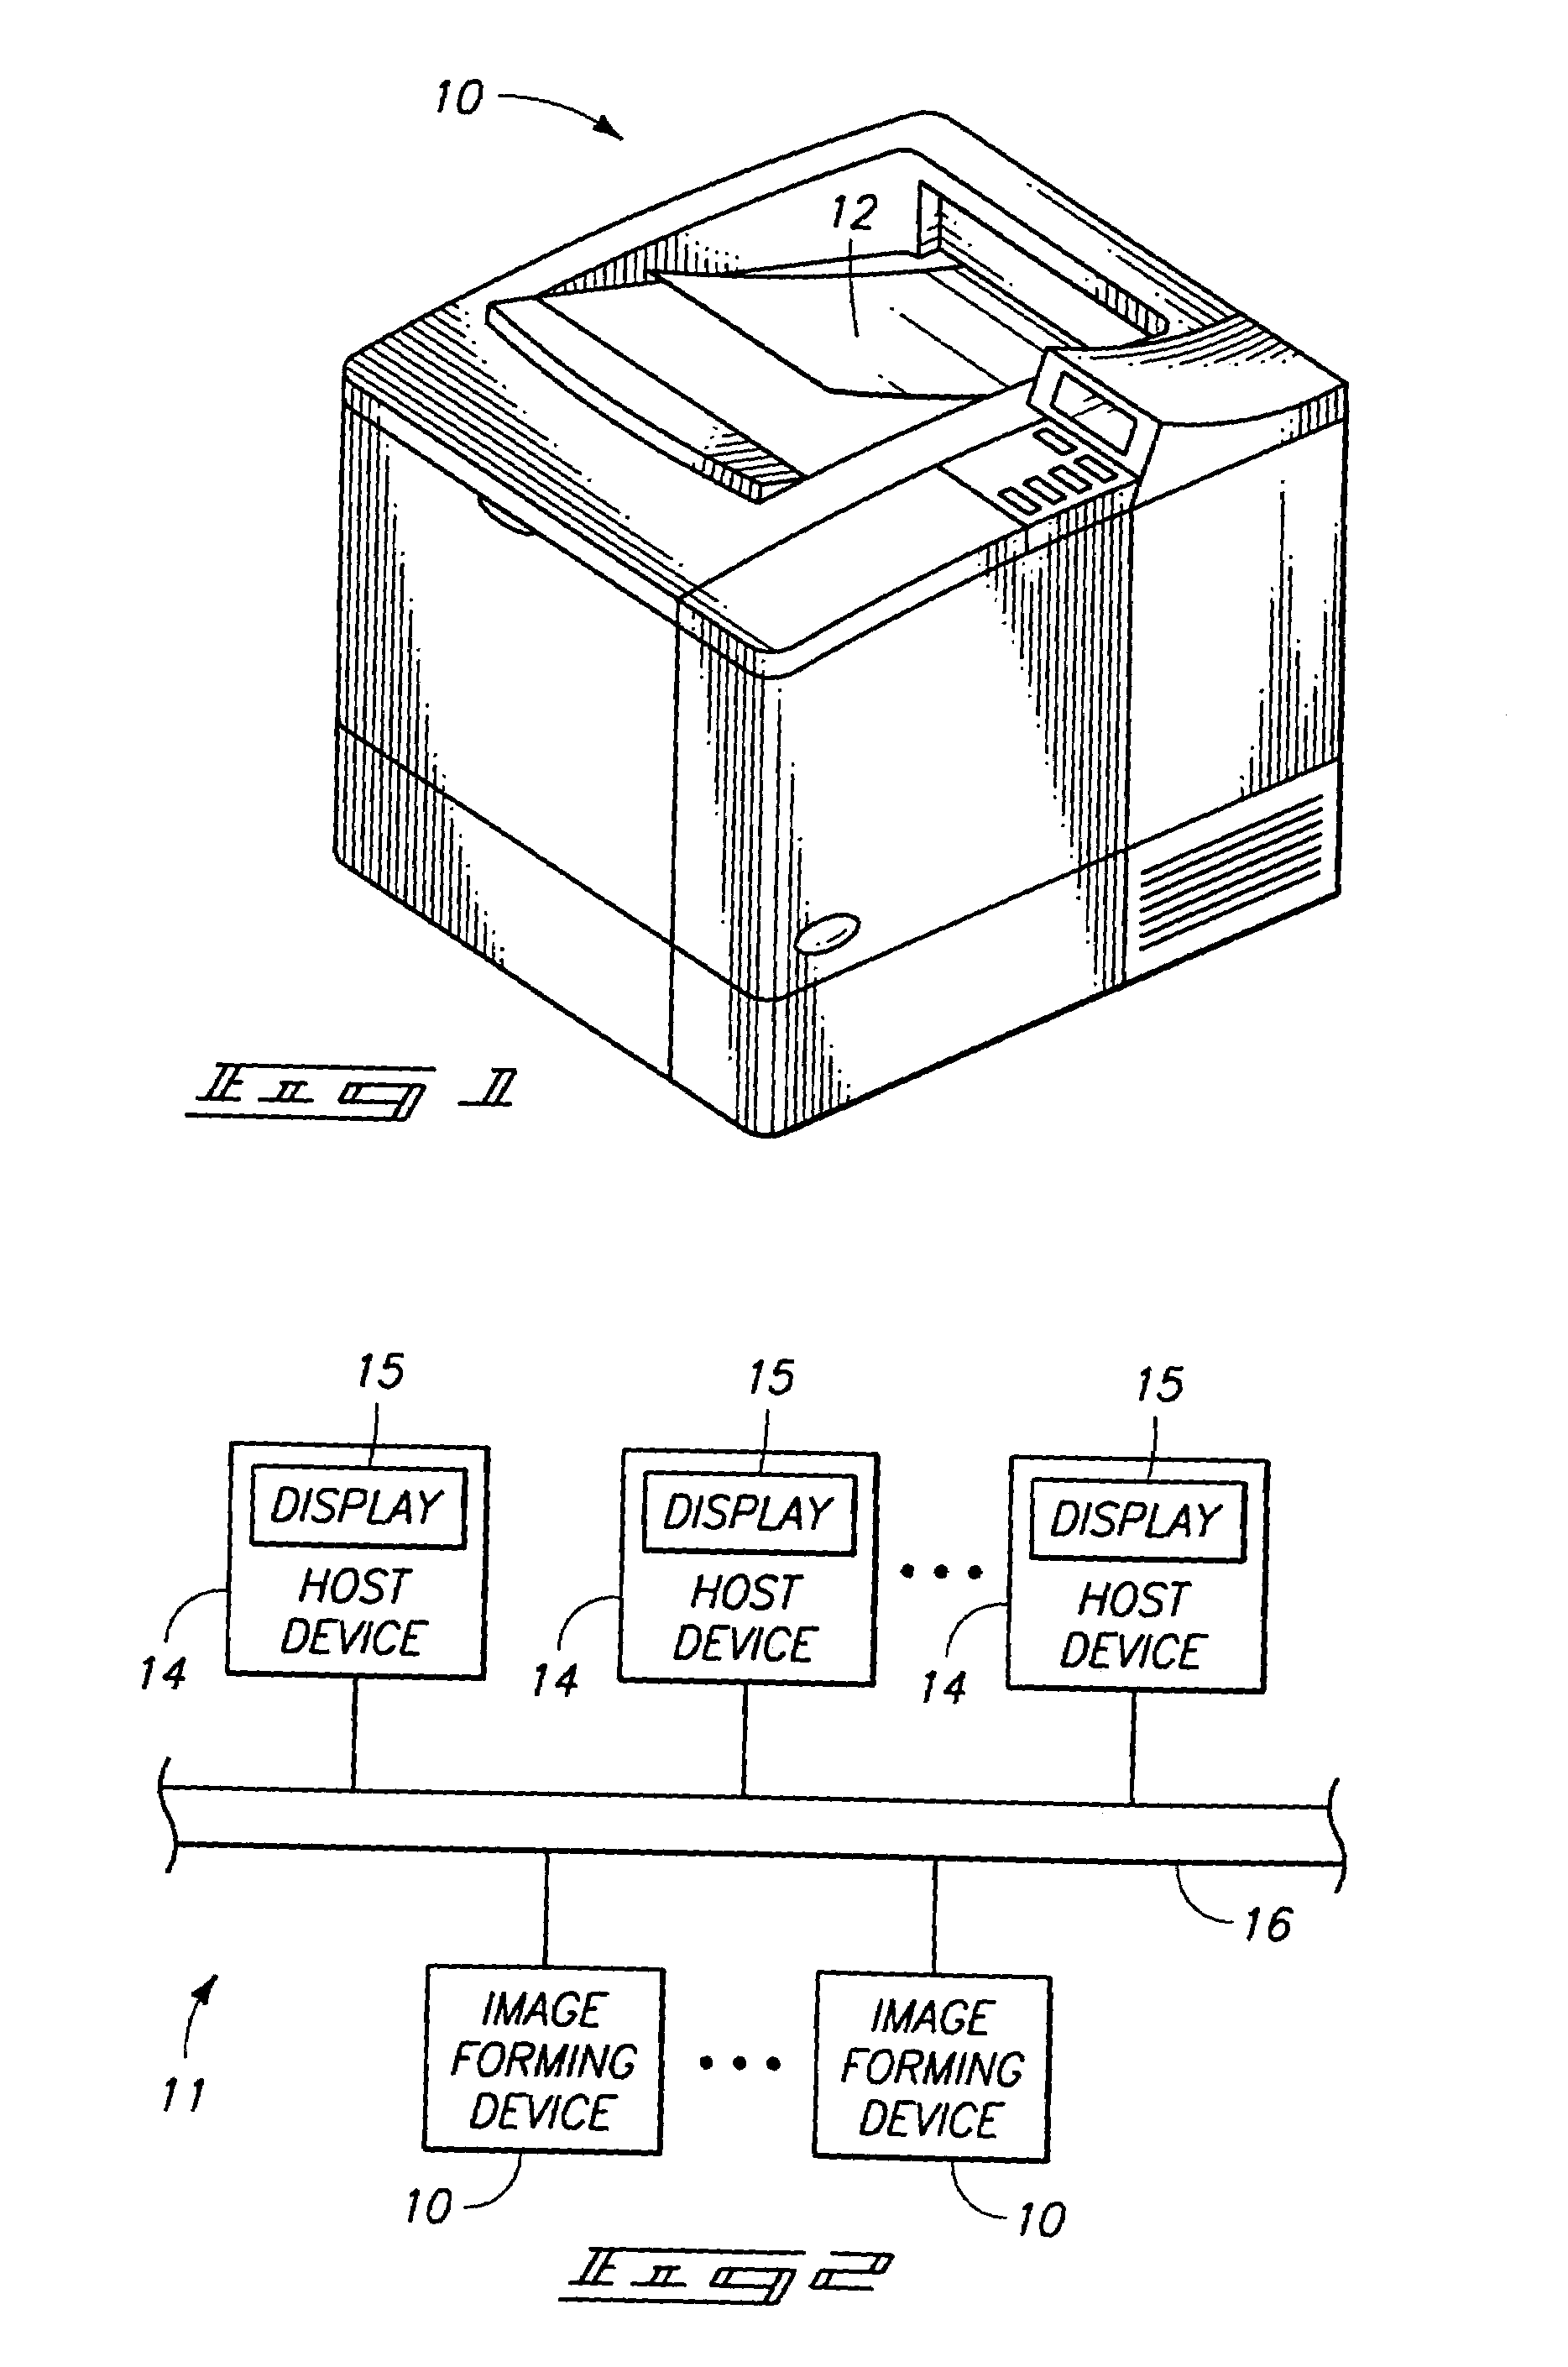 Image forming device, an image forming system, and a method of facilitating ordering of an imaging consumable